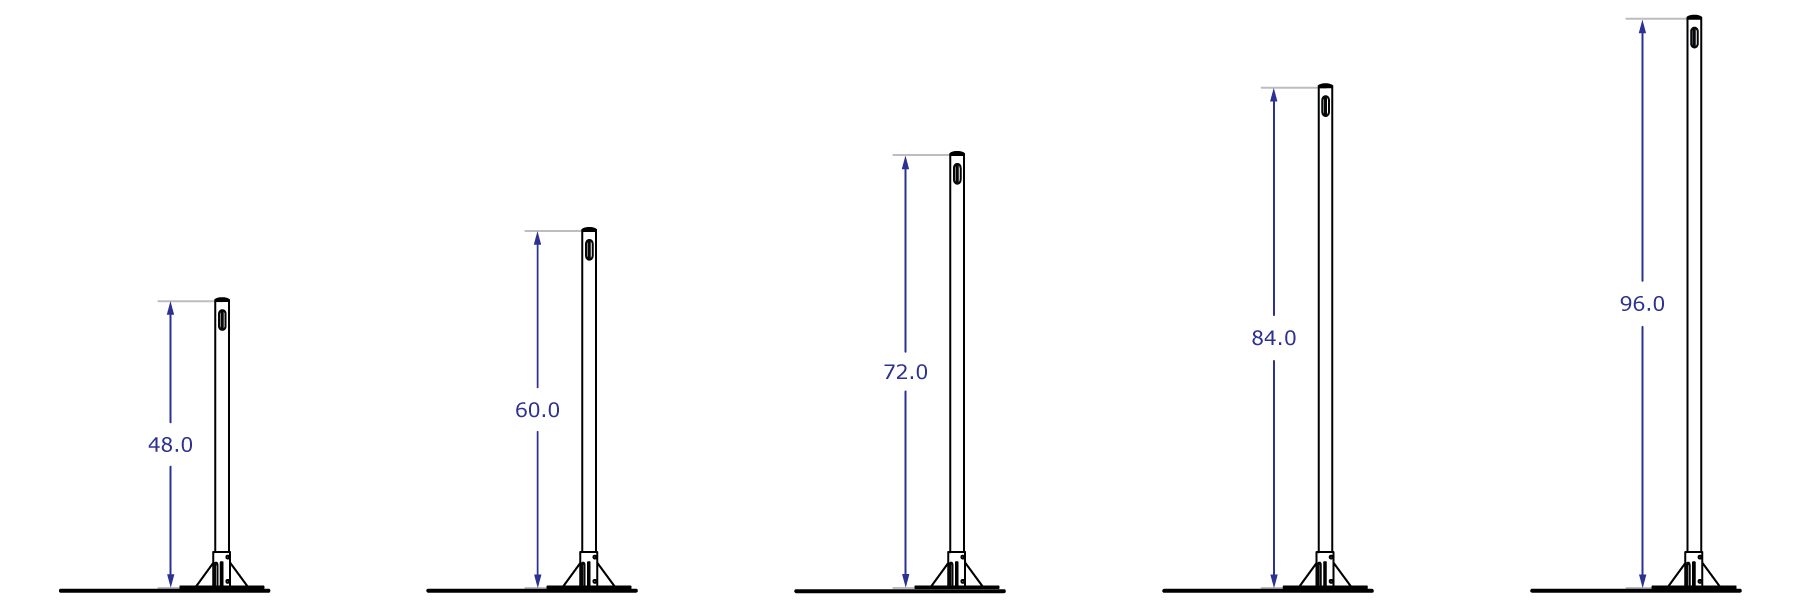 192OFFSET pole floor stand specification drawings showing five available pole lengths